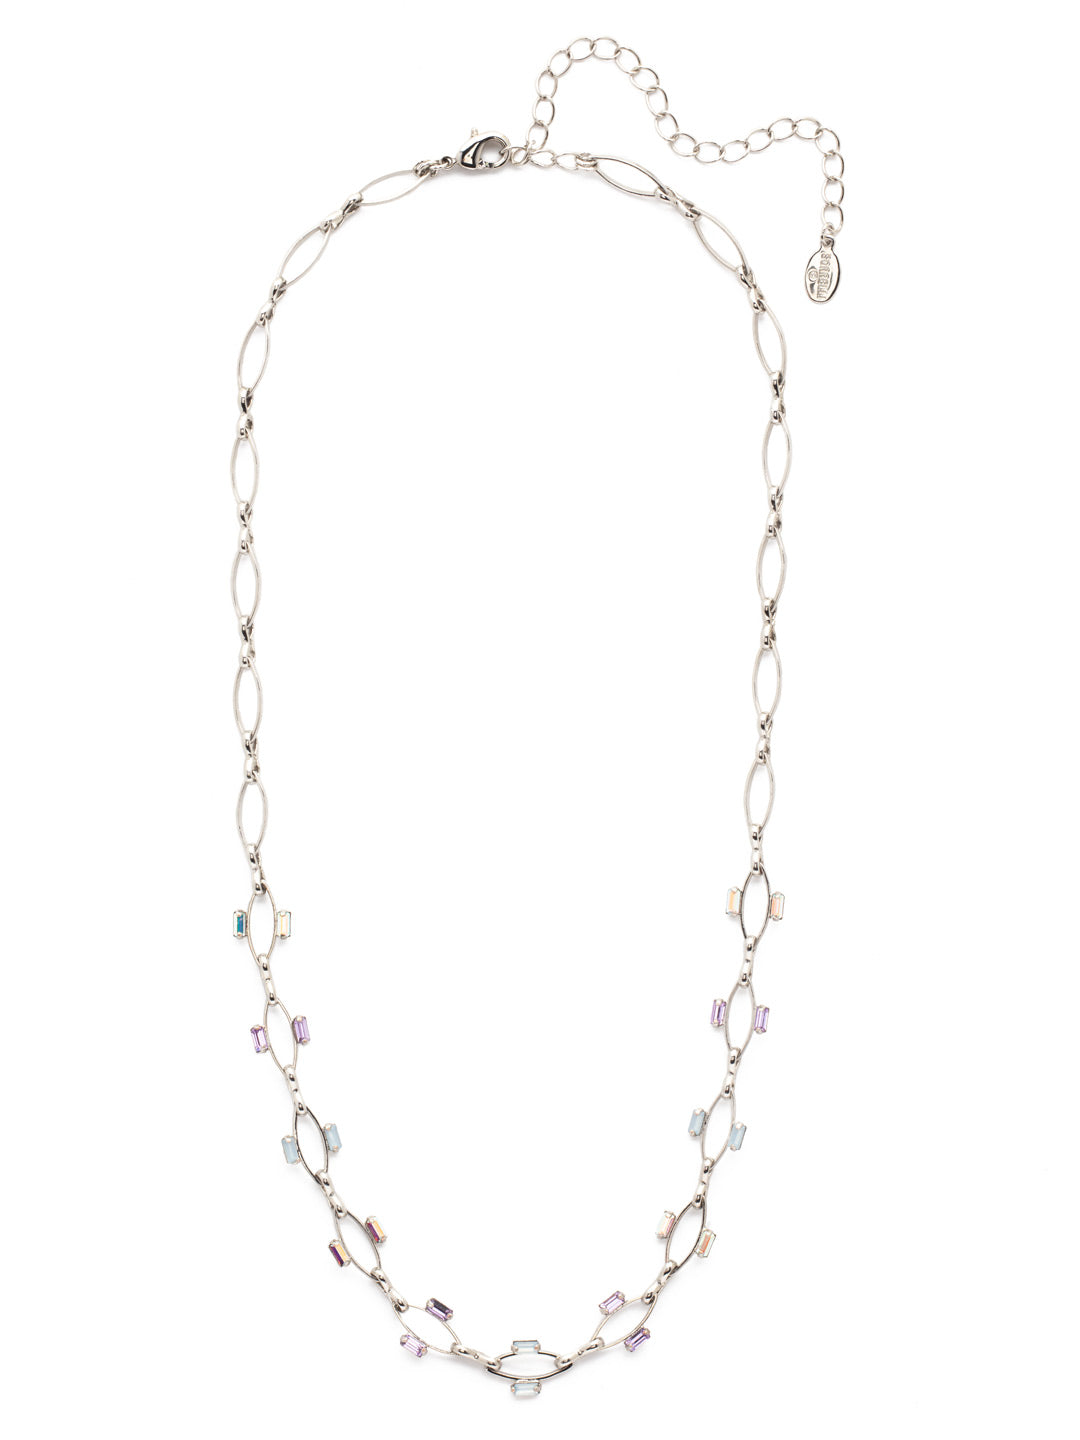 Violette Petite Tennis Necklace - NEY24PDCCC - <p>A strand of petite baguette crystal encrusted ovals string together on an adjustable chain. From Sorrelli's Cotton Candy Clouds collection in our Palladium finish.</p>